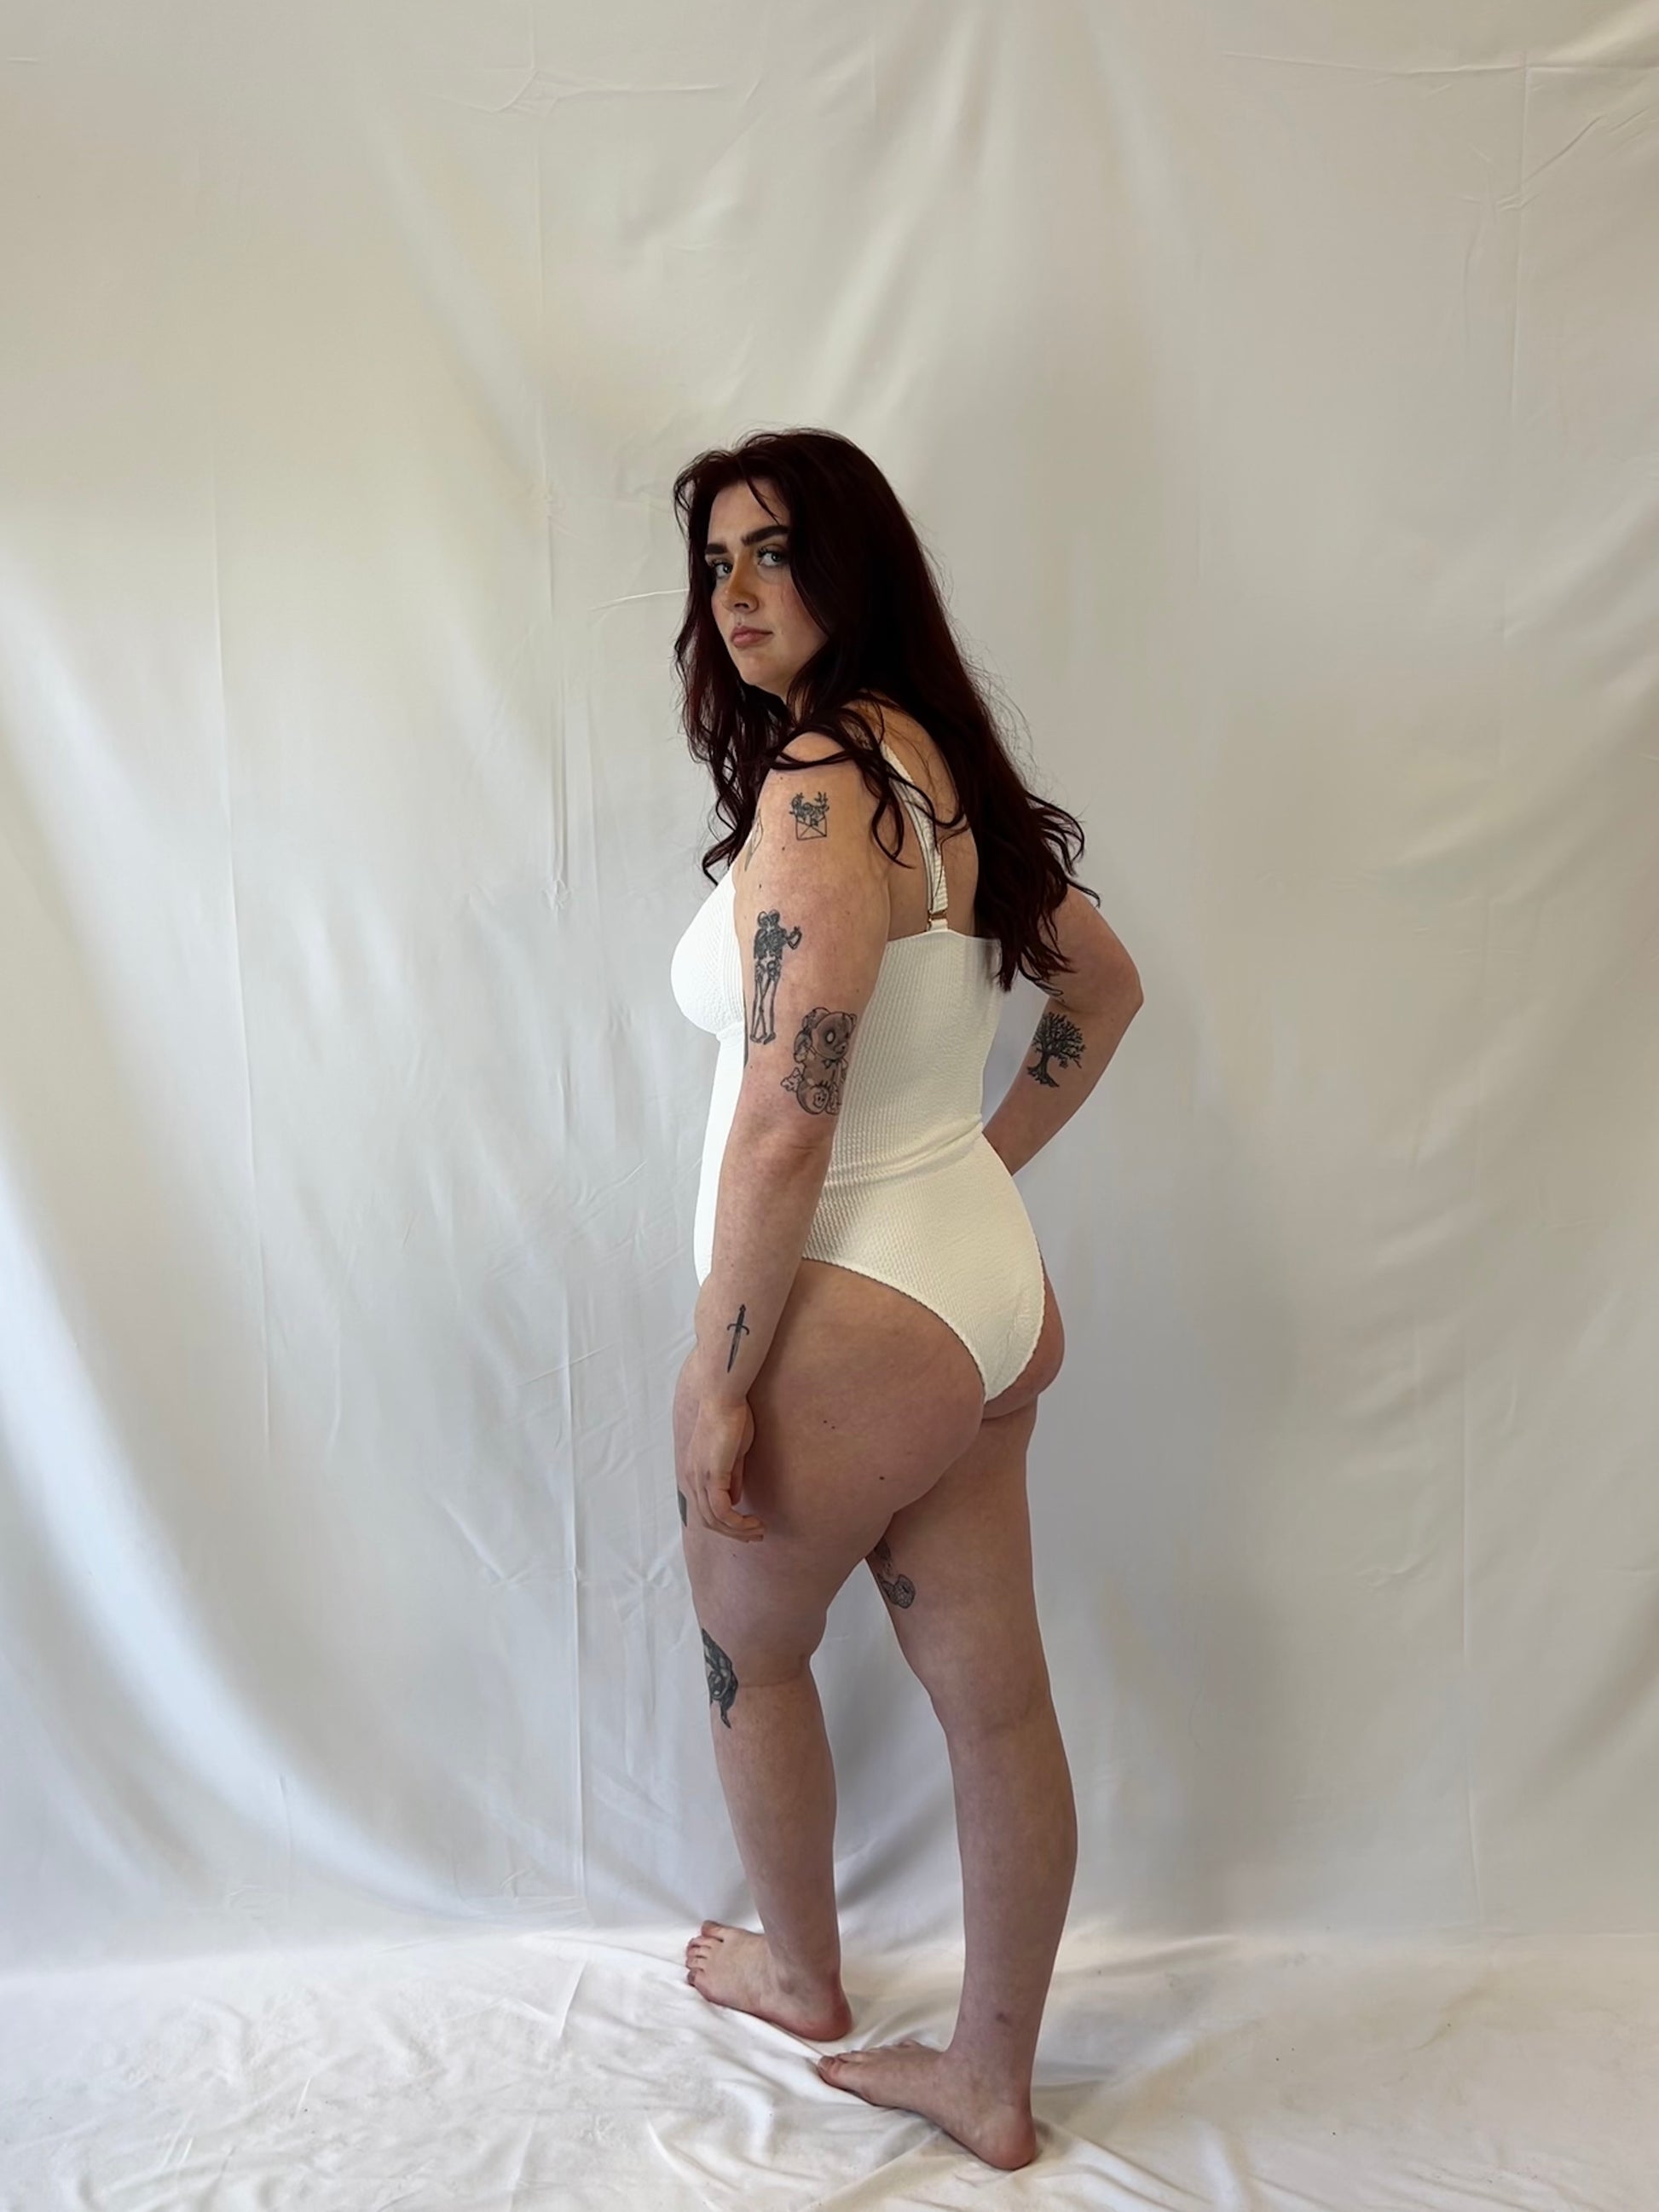 Side view of the white one piece swimsuit. Woman wears the milkmaid style tie front crinkle fabric one piece. White one piece is high cut and cheeky.  